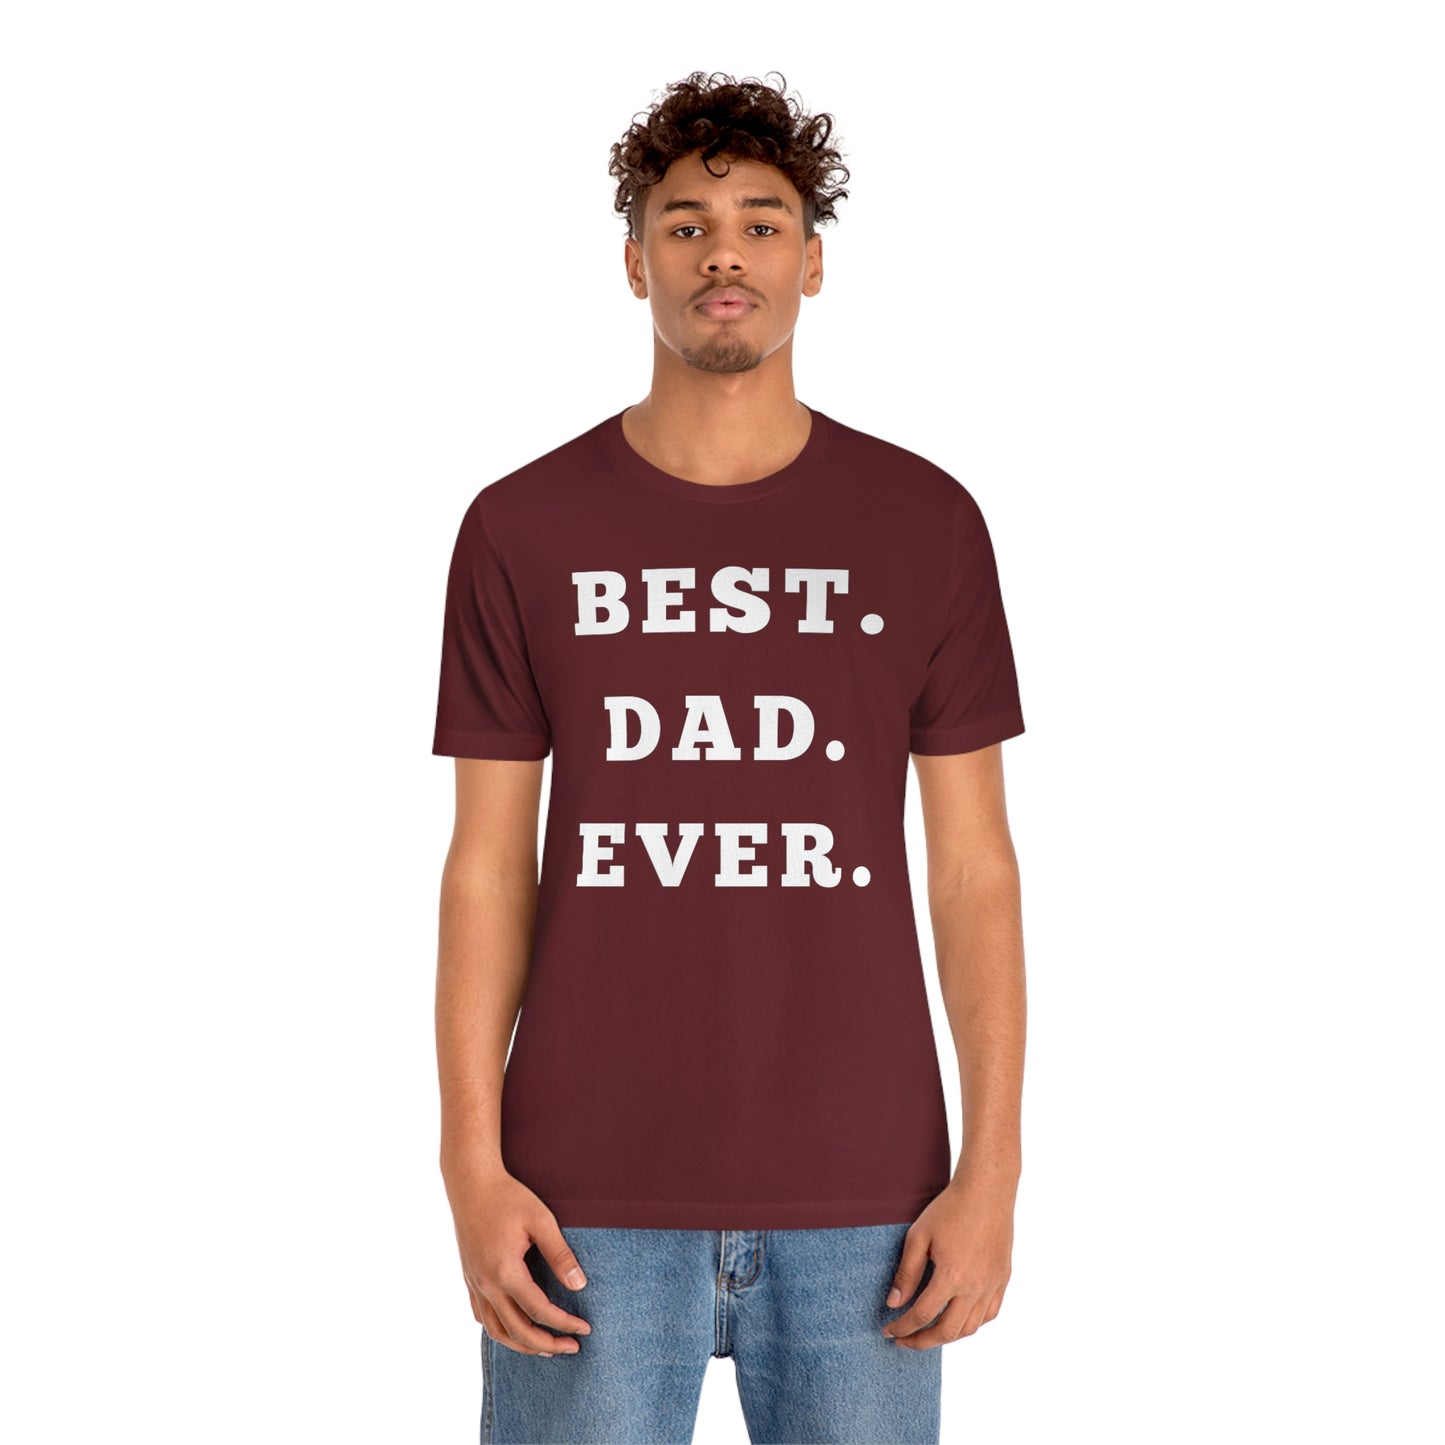 Dad Gift - Best Dad Gift - Best Super Dad Ever Shirt -Dad Shirt - Funny Fathers Gift - Husband Gift - Funny Dad Tshirt - Dad Birthday Gift